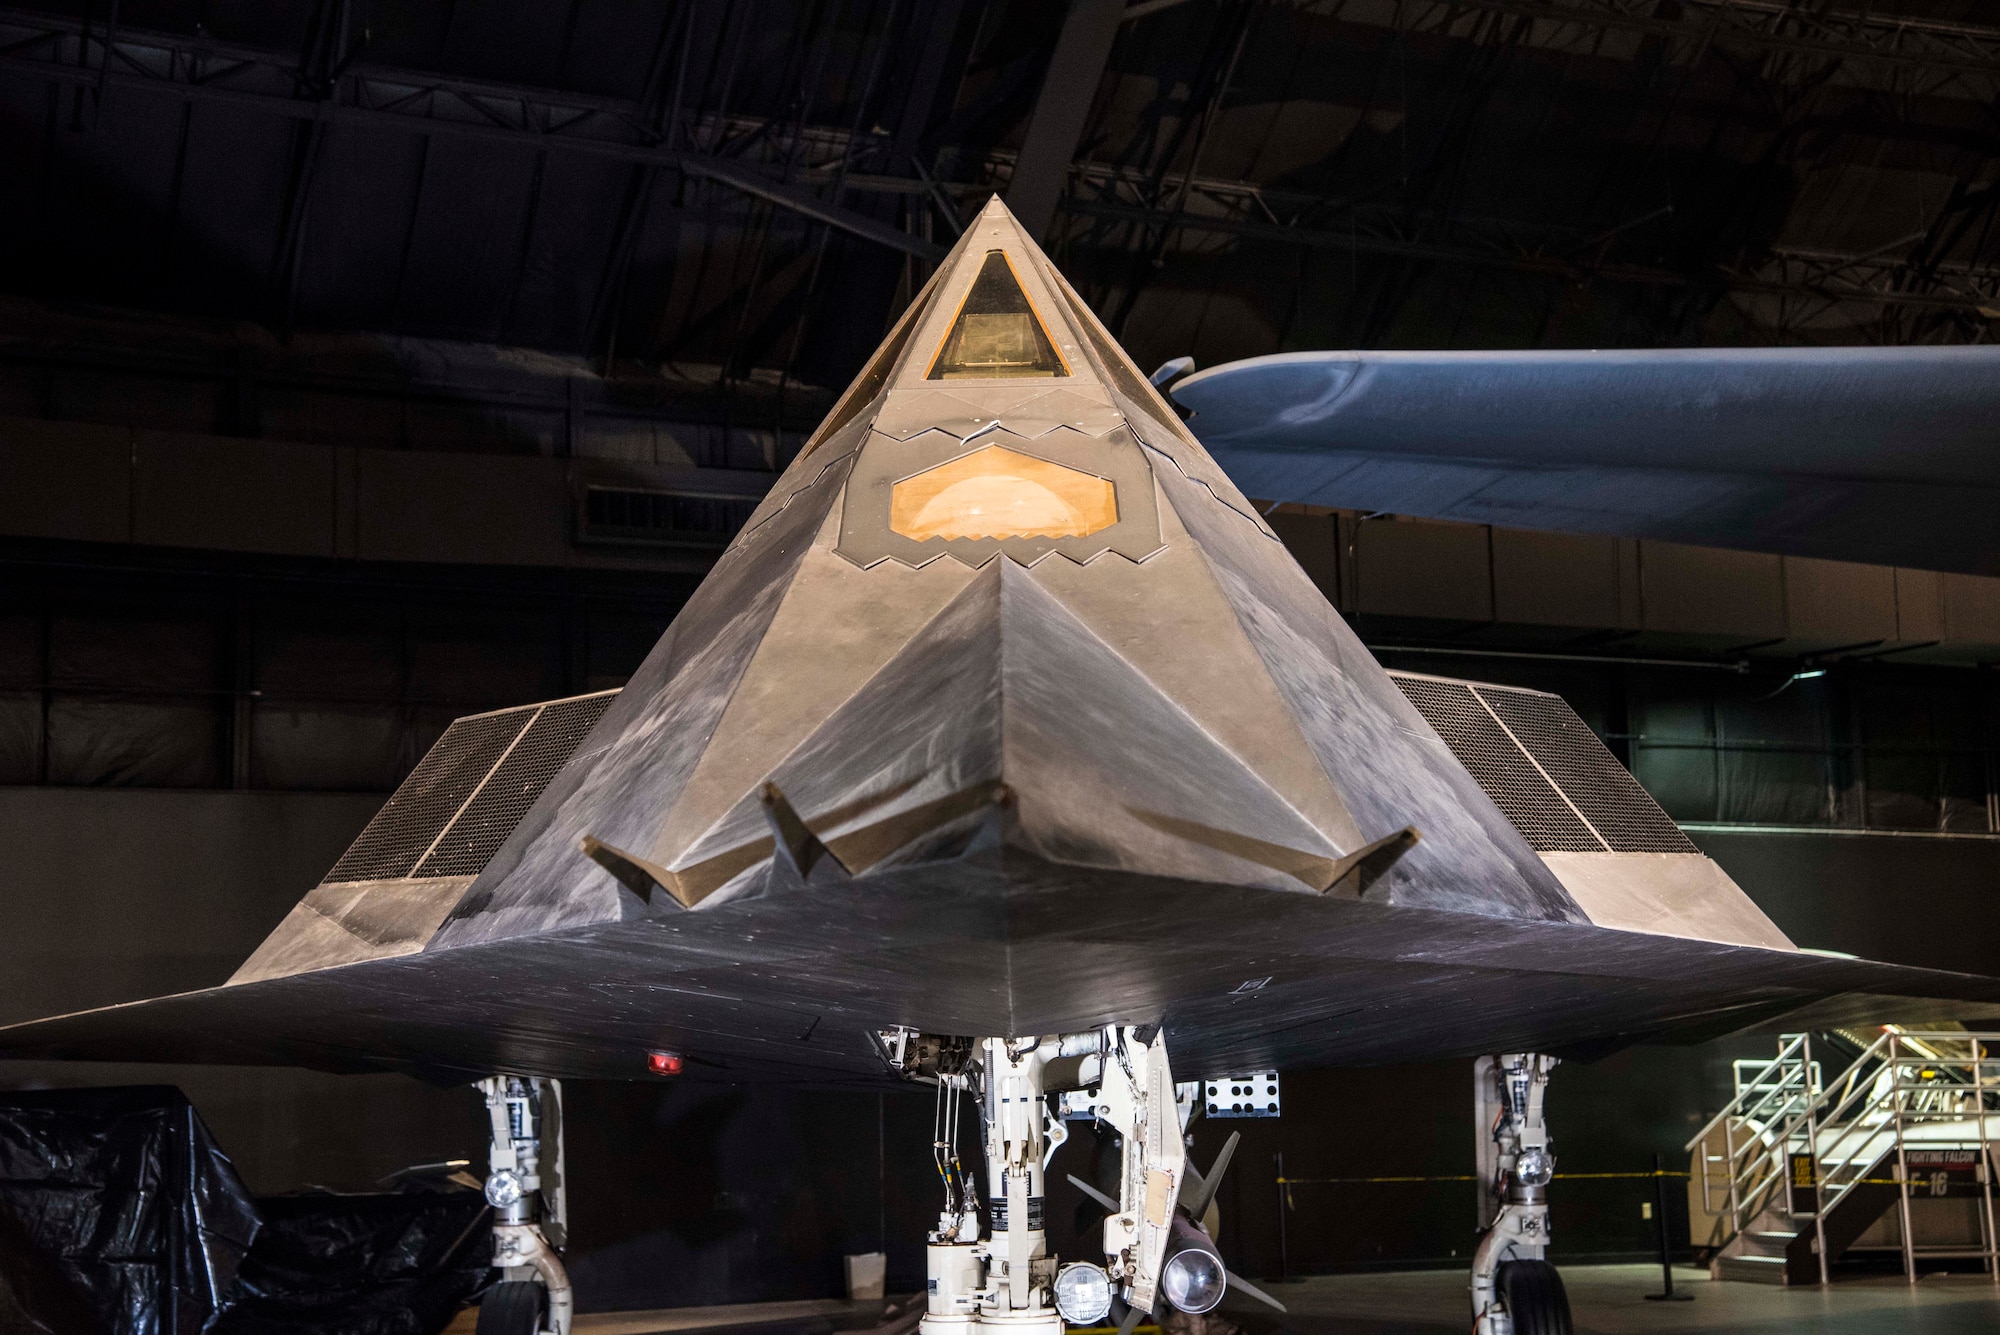 DAYTON, Ohio -- Lockheed F-117A Nighthawk on display in the Cold War Gallery at the National Museum of the United States Air Force. (U.S. Air Force photo by Ken LaRock)